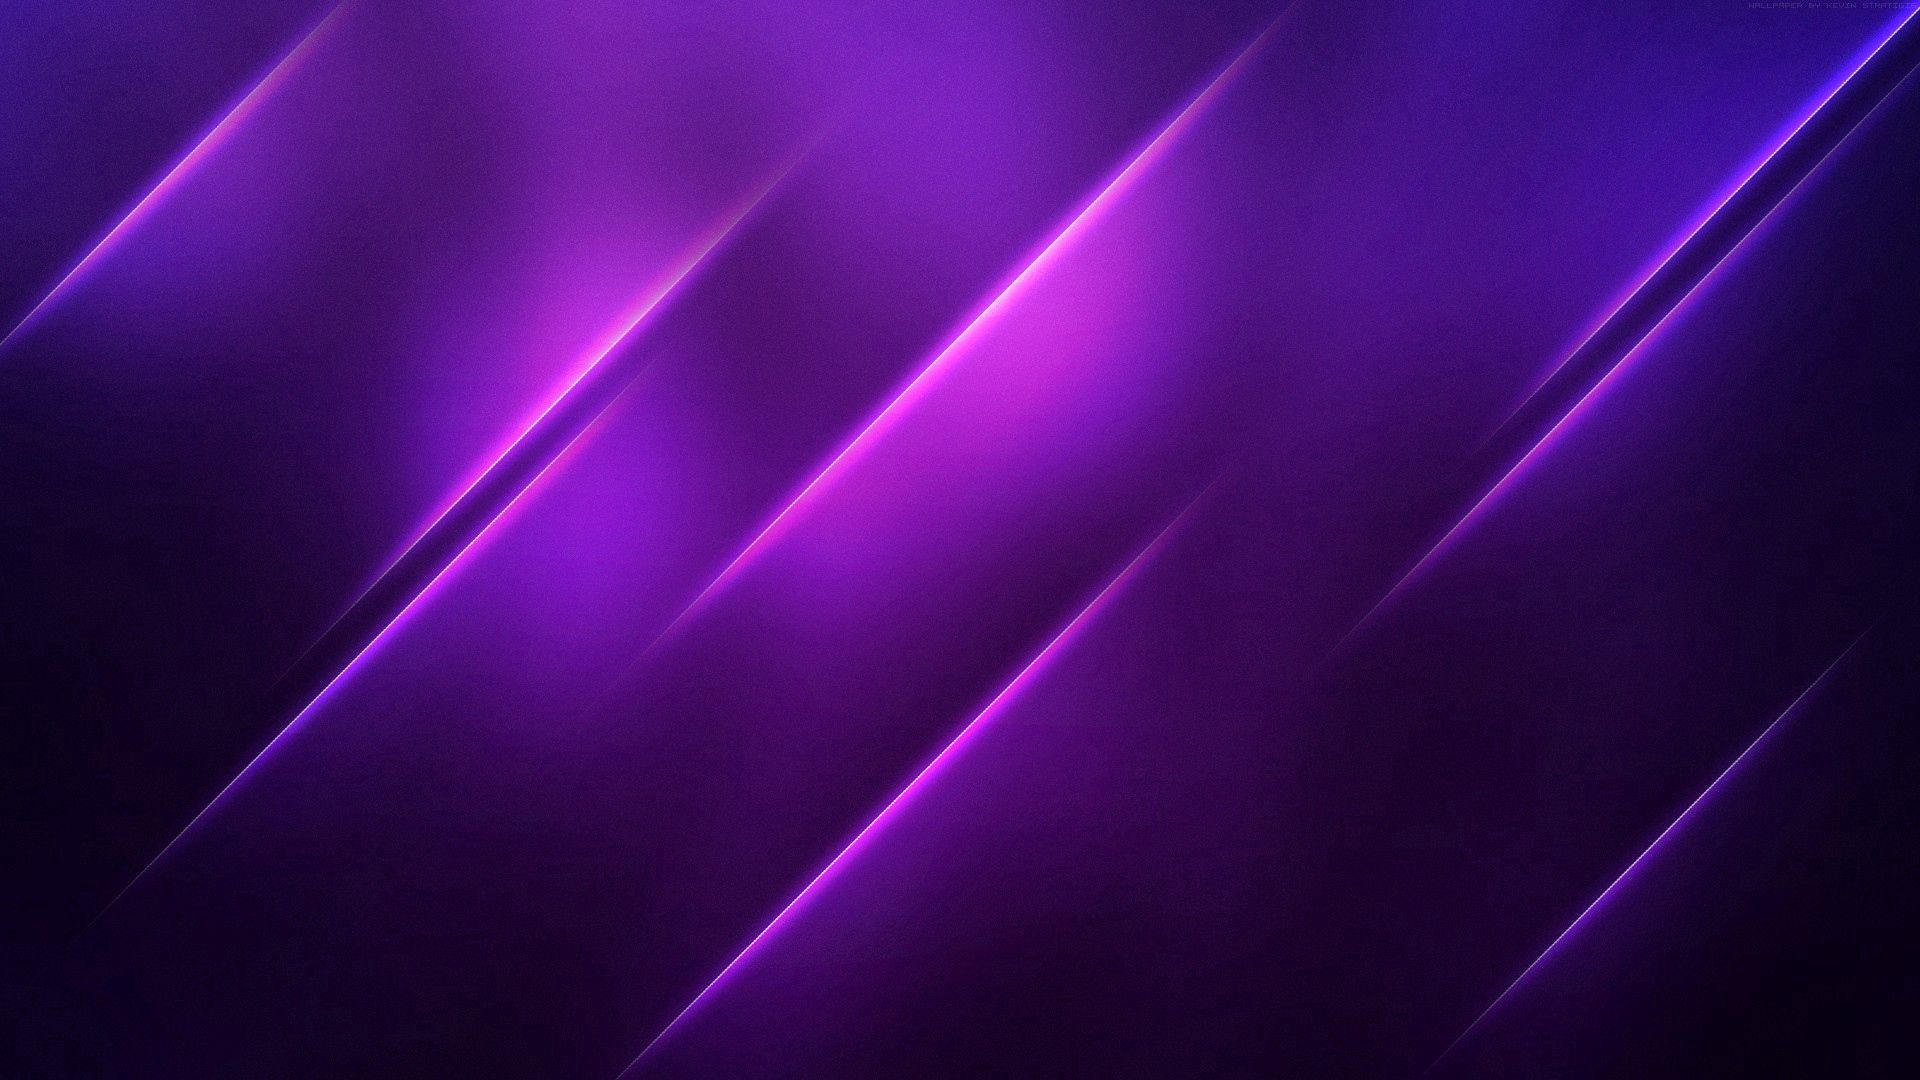 purple, violet, obliquely, abstract, bright, lines phone wallpaper